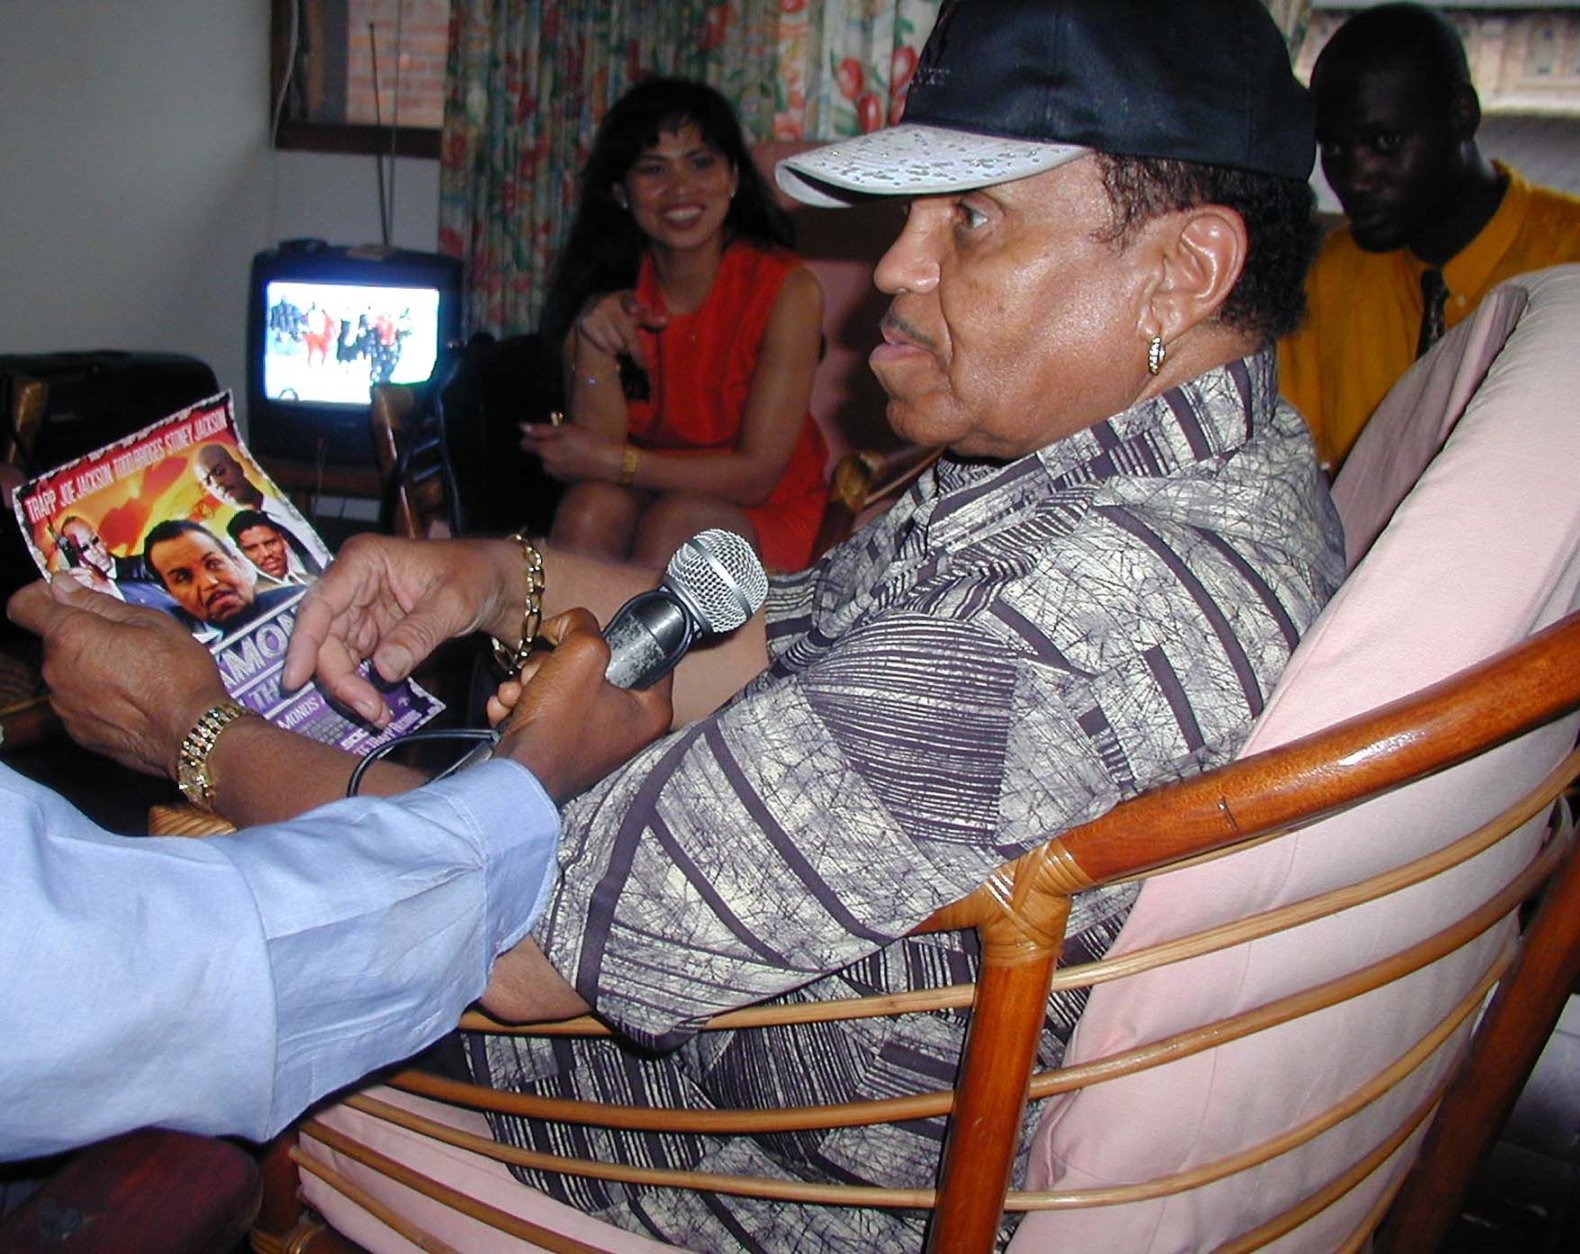 Joe Jackson, father of American pop icon Michael Jackson, visits Kinshasa on Tuesday, April 9, 2002. Jackson recently made his acting debut in a movie about the diamond trade in the war-ravaged country and said he hoped to find sites in Congo to make more movies. (AP Photo/Blaise Musau)